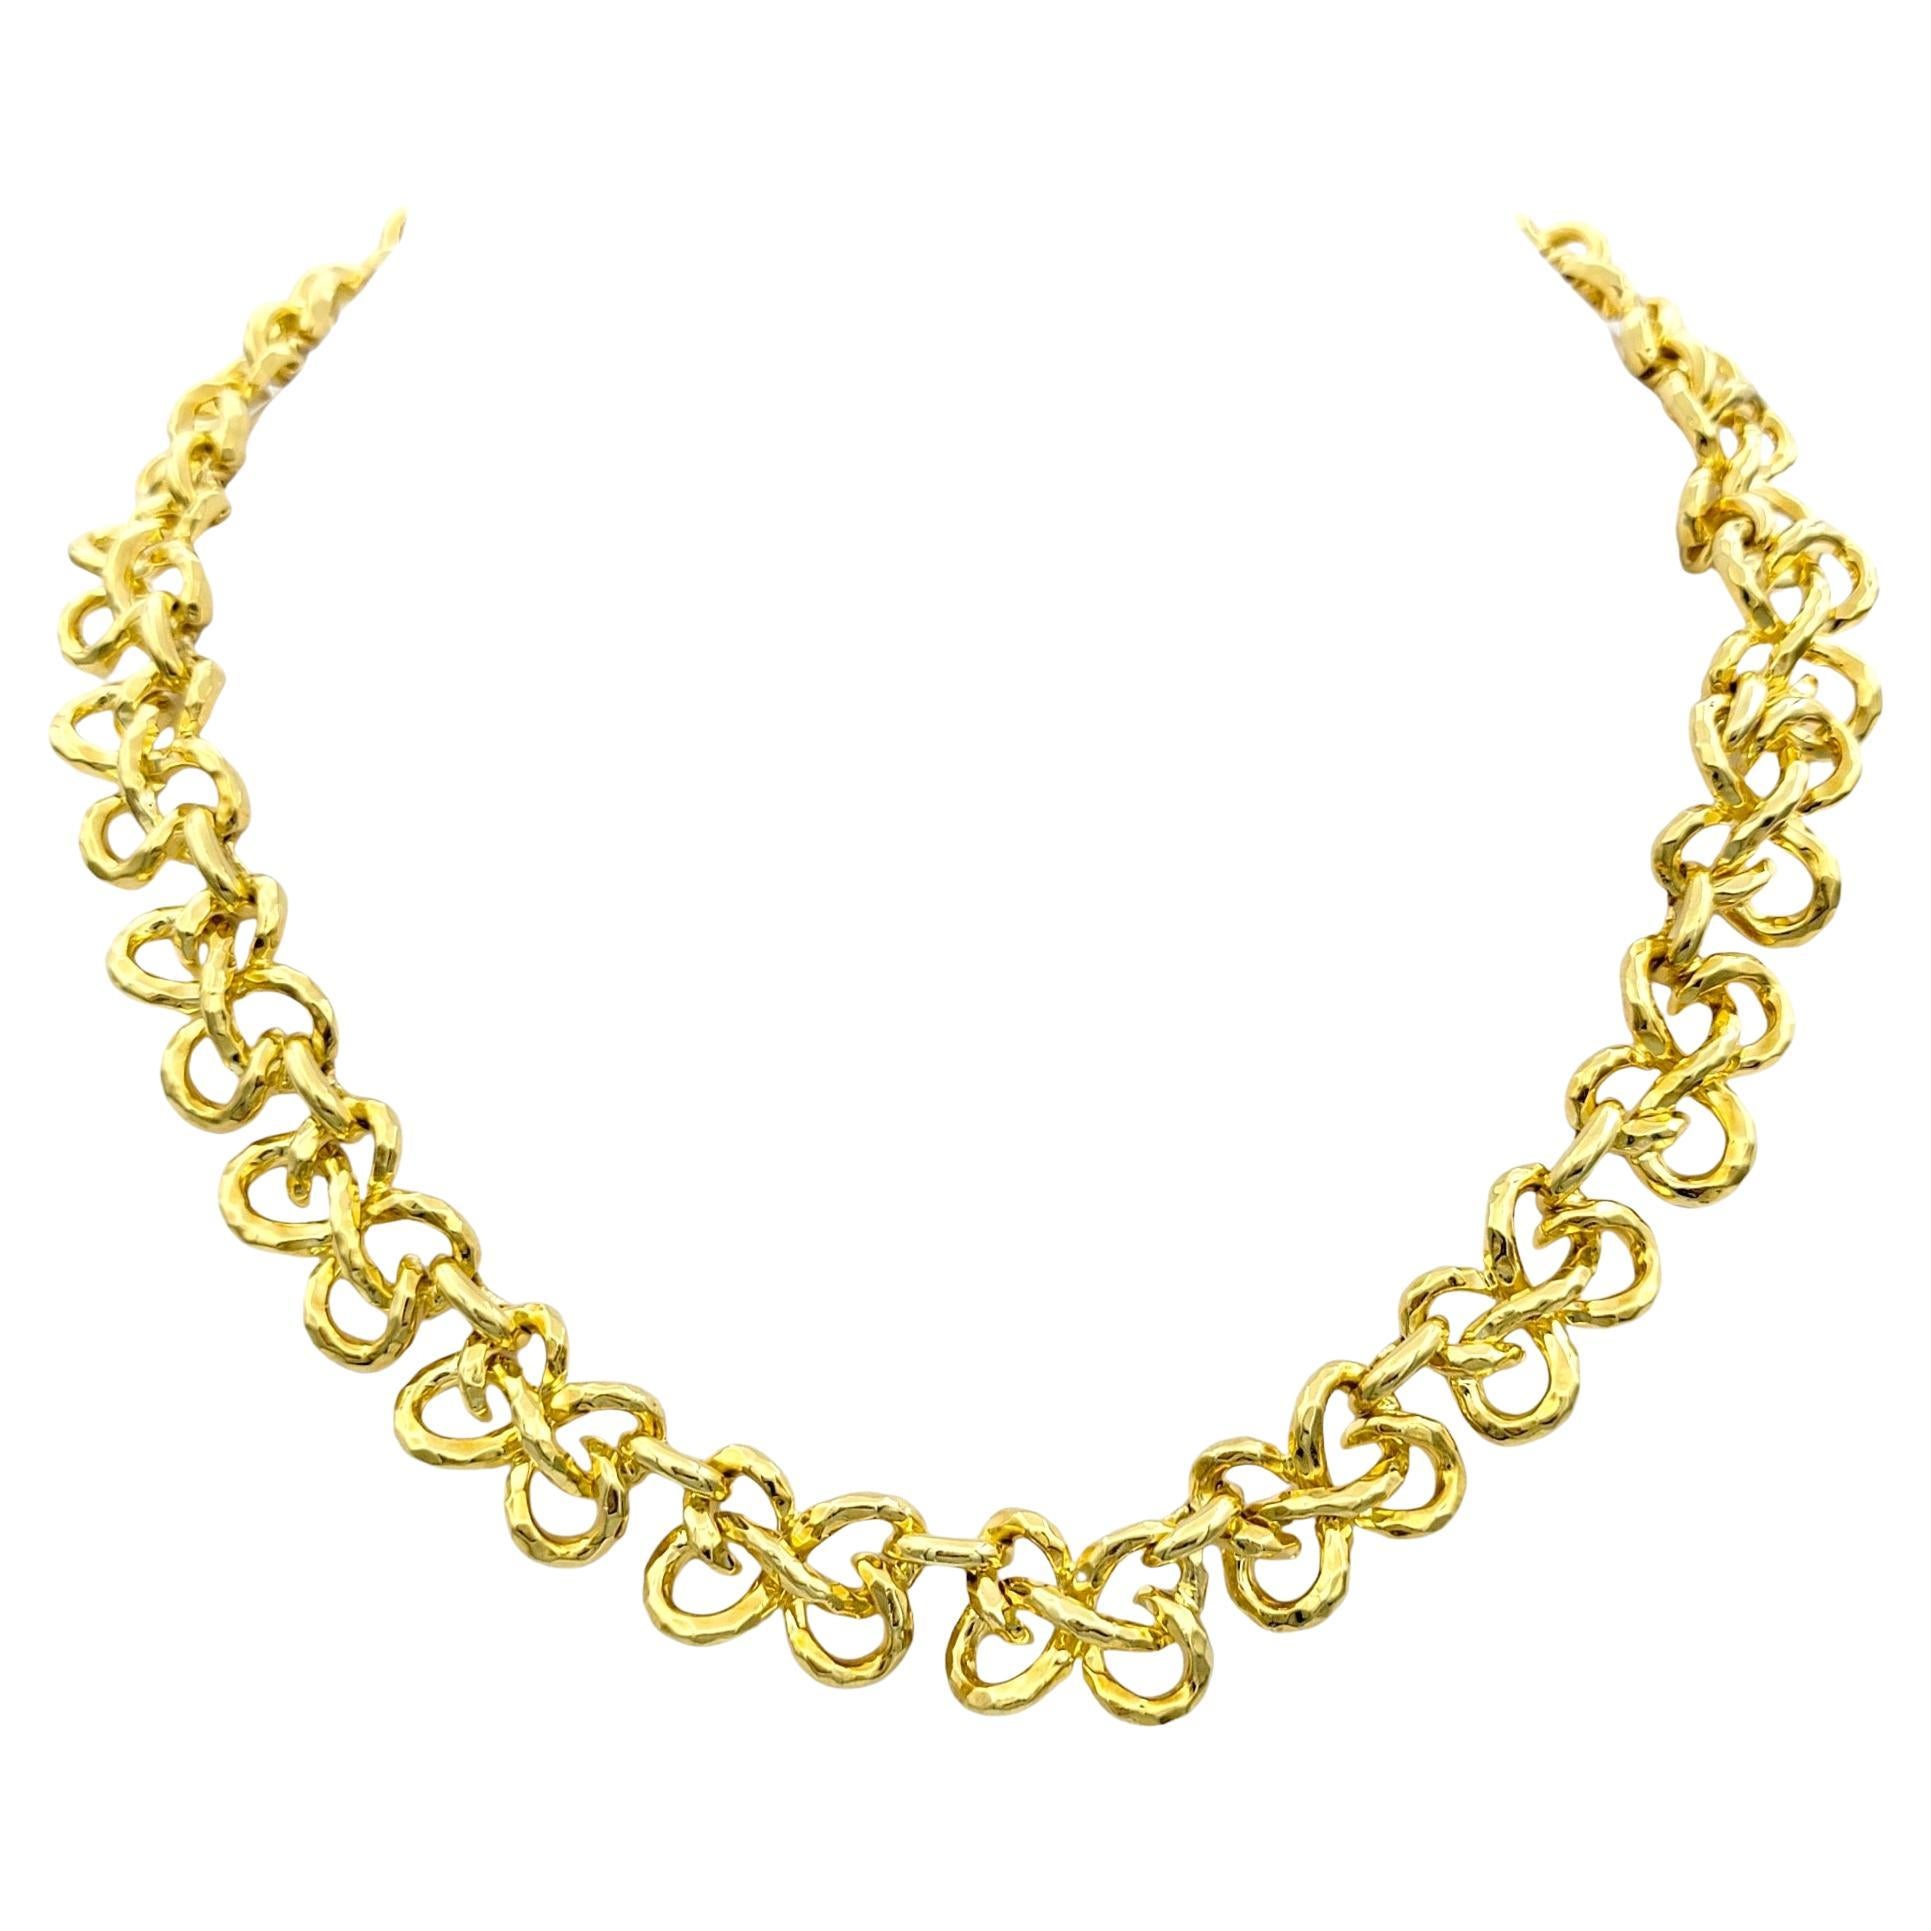 Henry Dunay Twisted Ribbon Link Collar Necklace Set in 18 Karat Yellow Gold